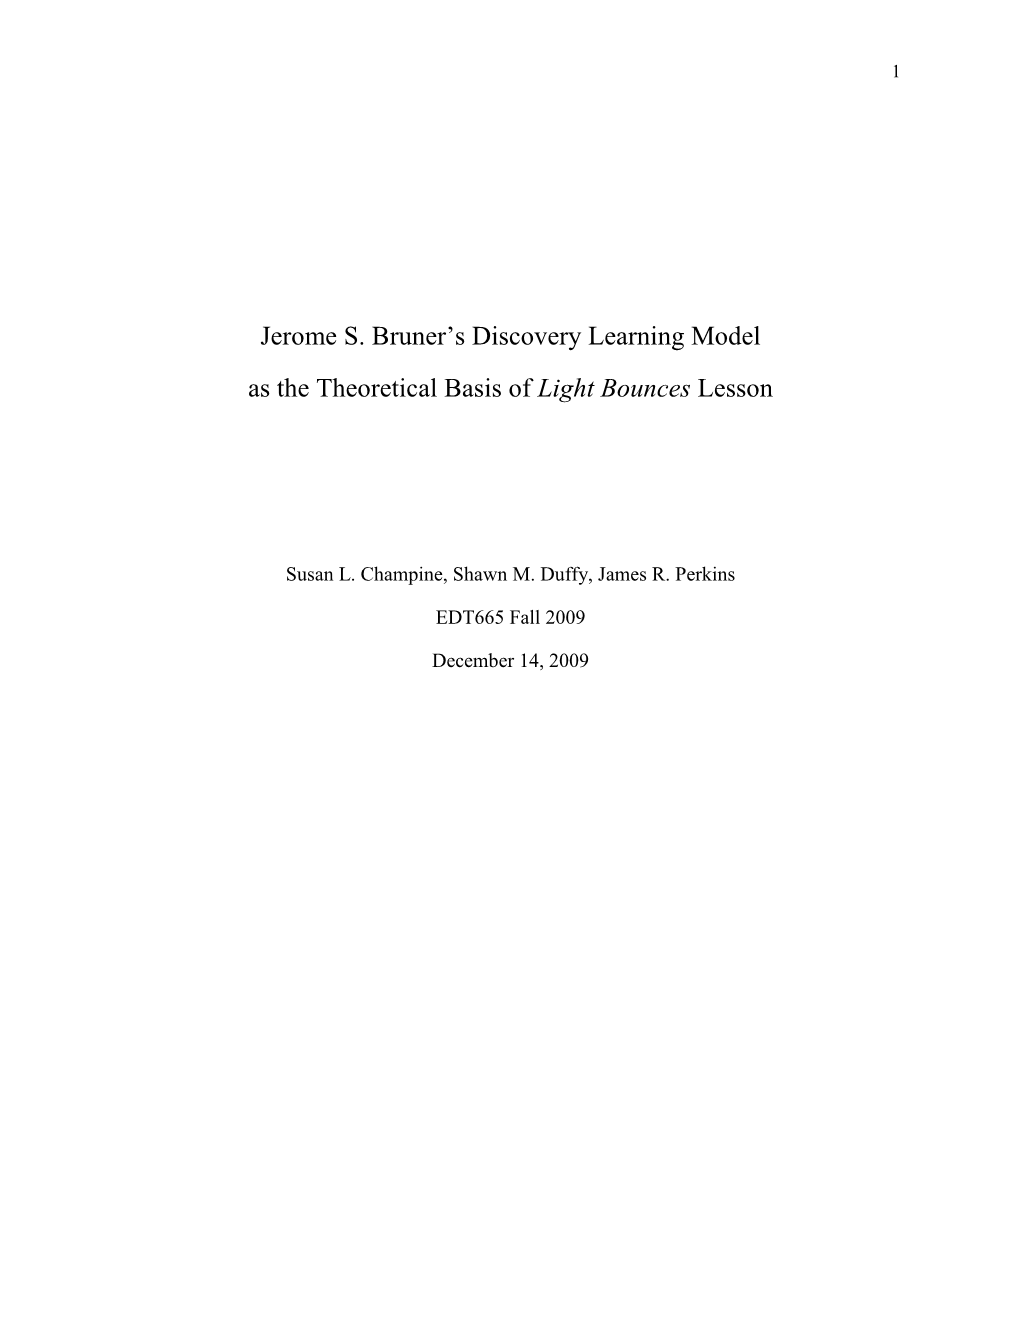 Jerome S. Bruner‟S Discovery Learning Model As the Theoretical Basis of Light Bounces Lesson